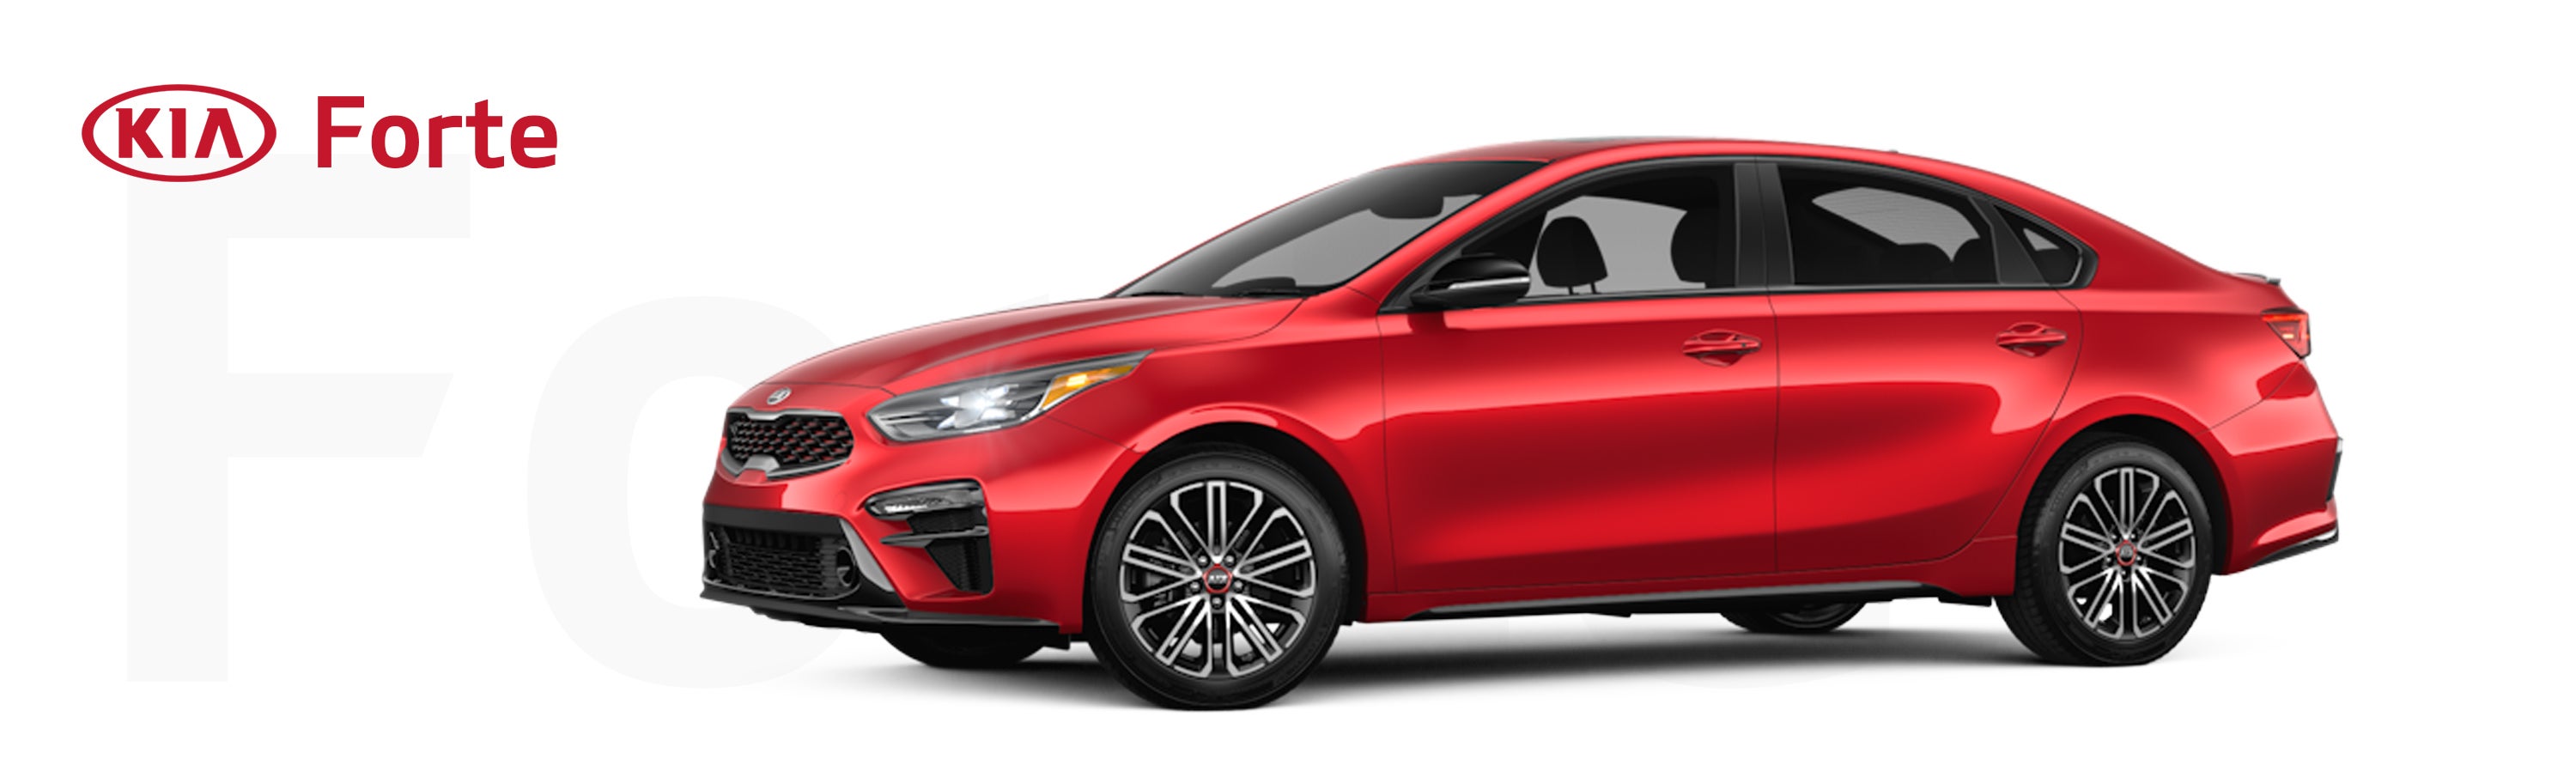 2020 Kia Forte at Clay Cooley Kia Irving in Irving TX